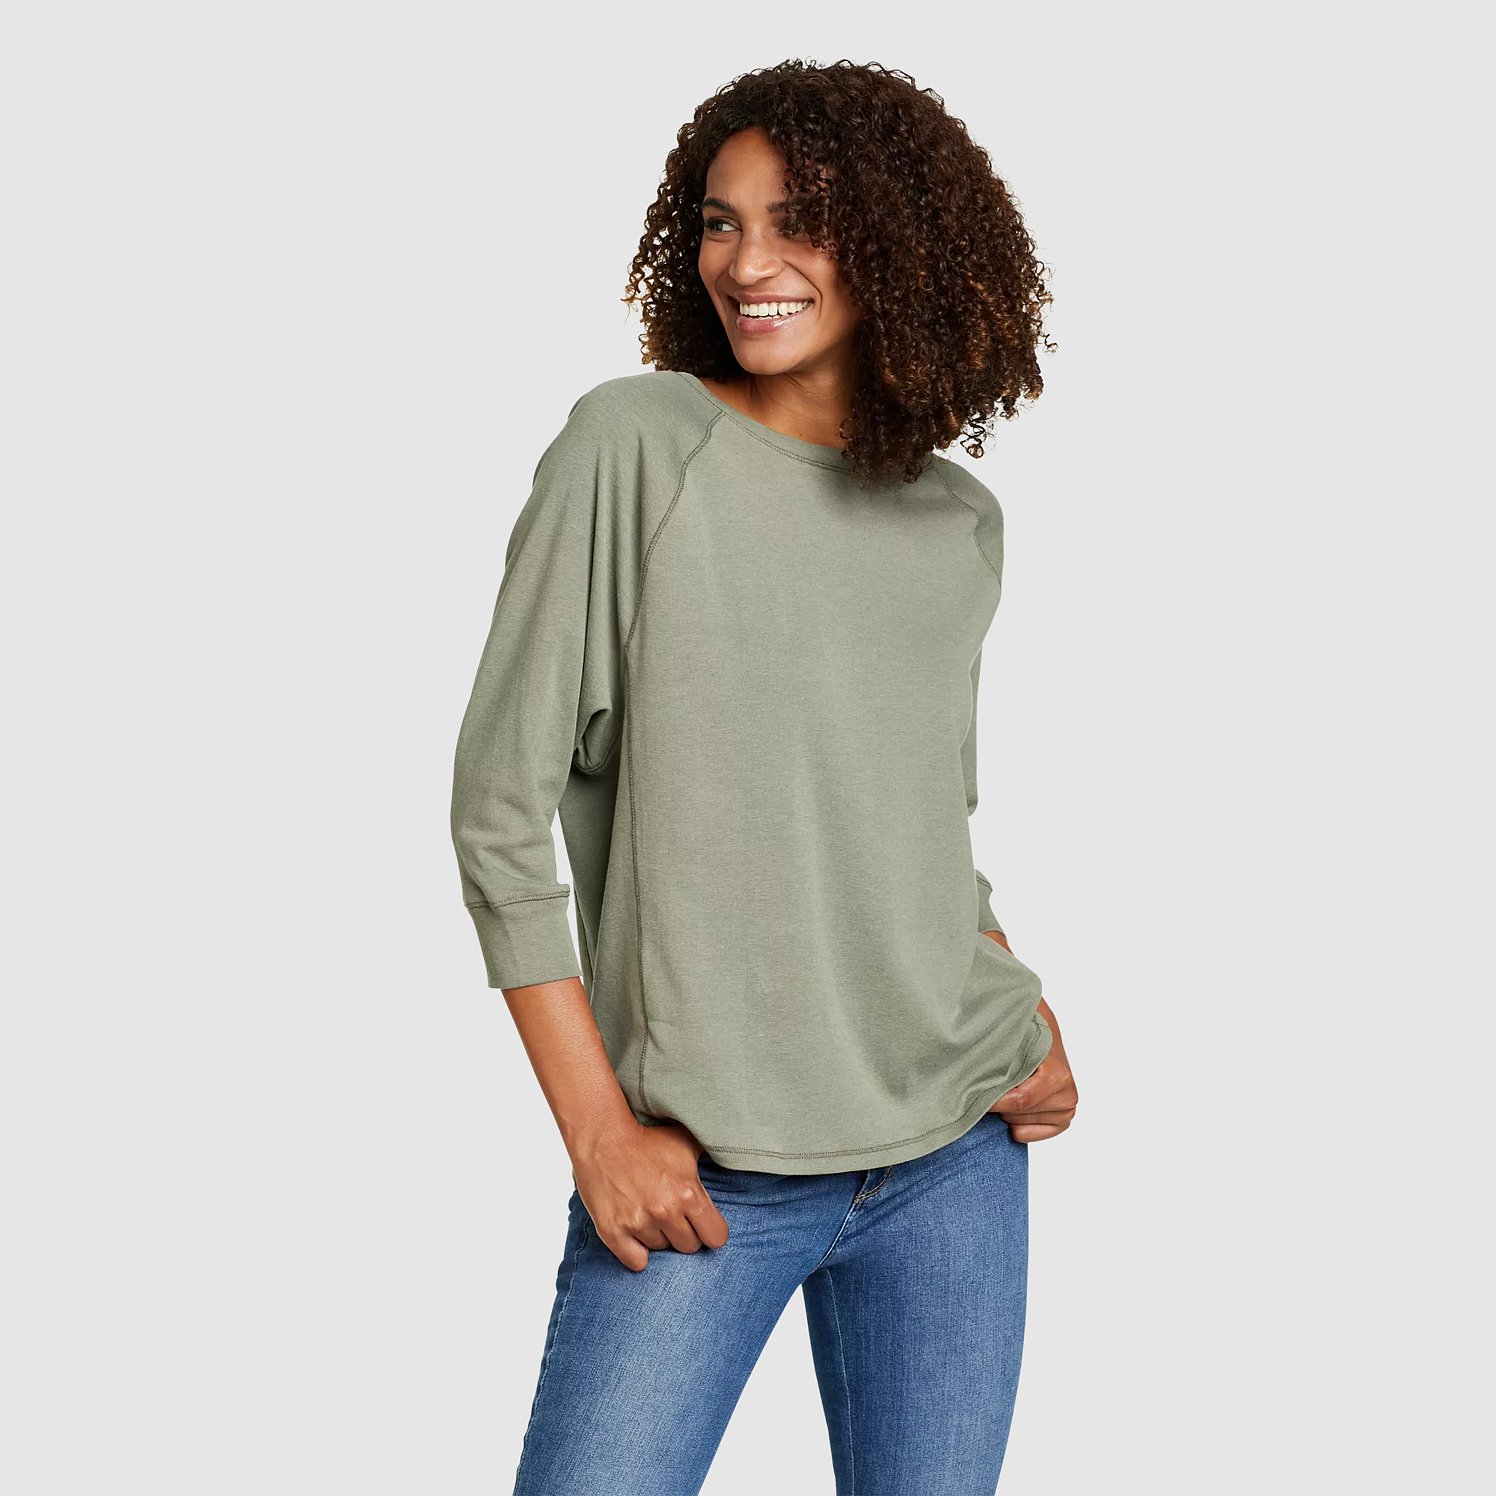 Free to Live Dolman 3/4 Sleeve Business Casual Tops for Women